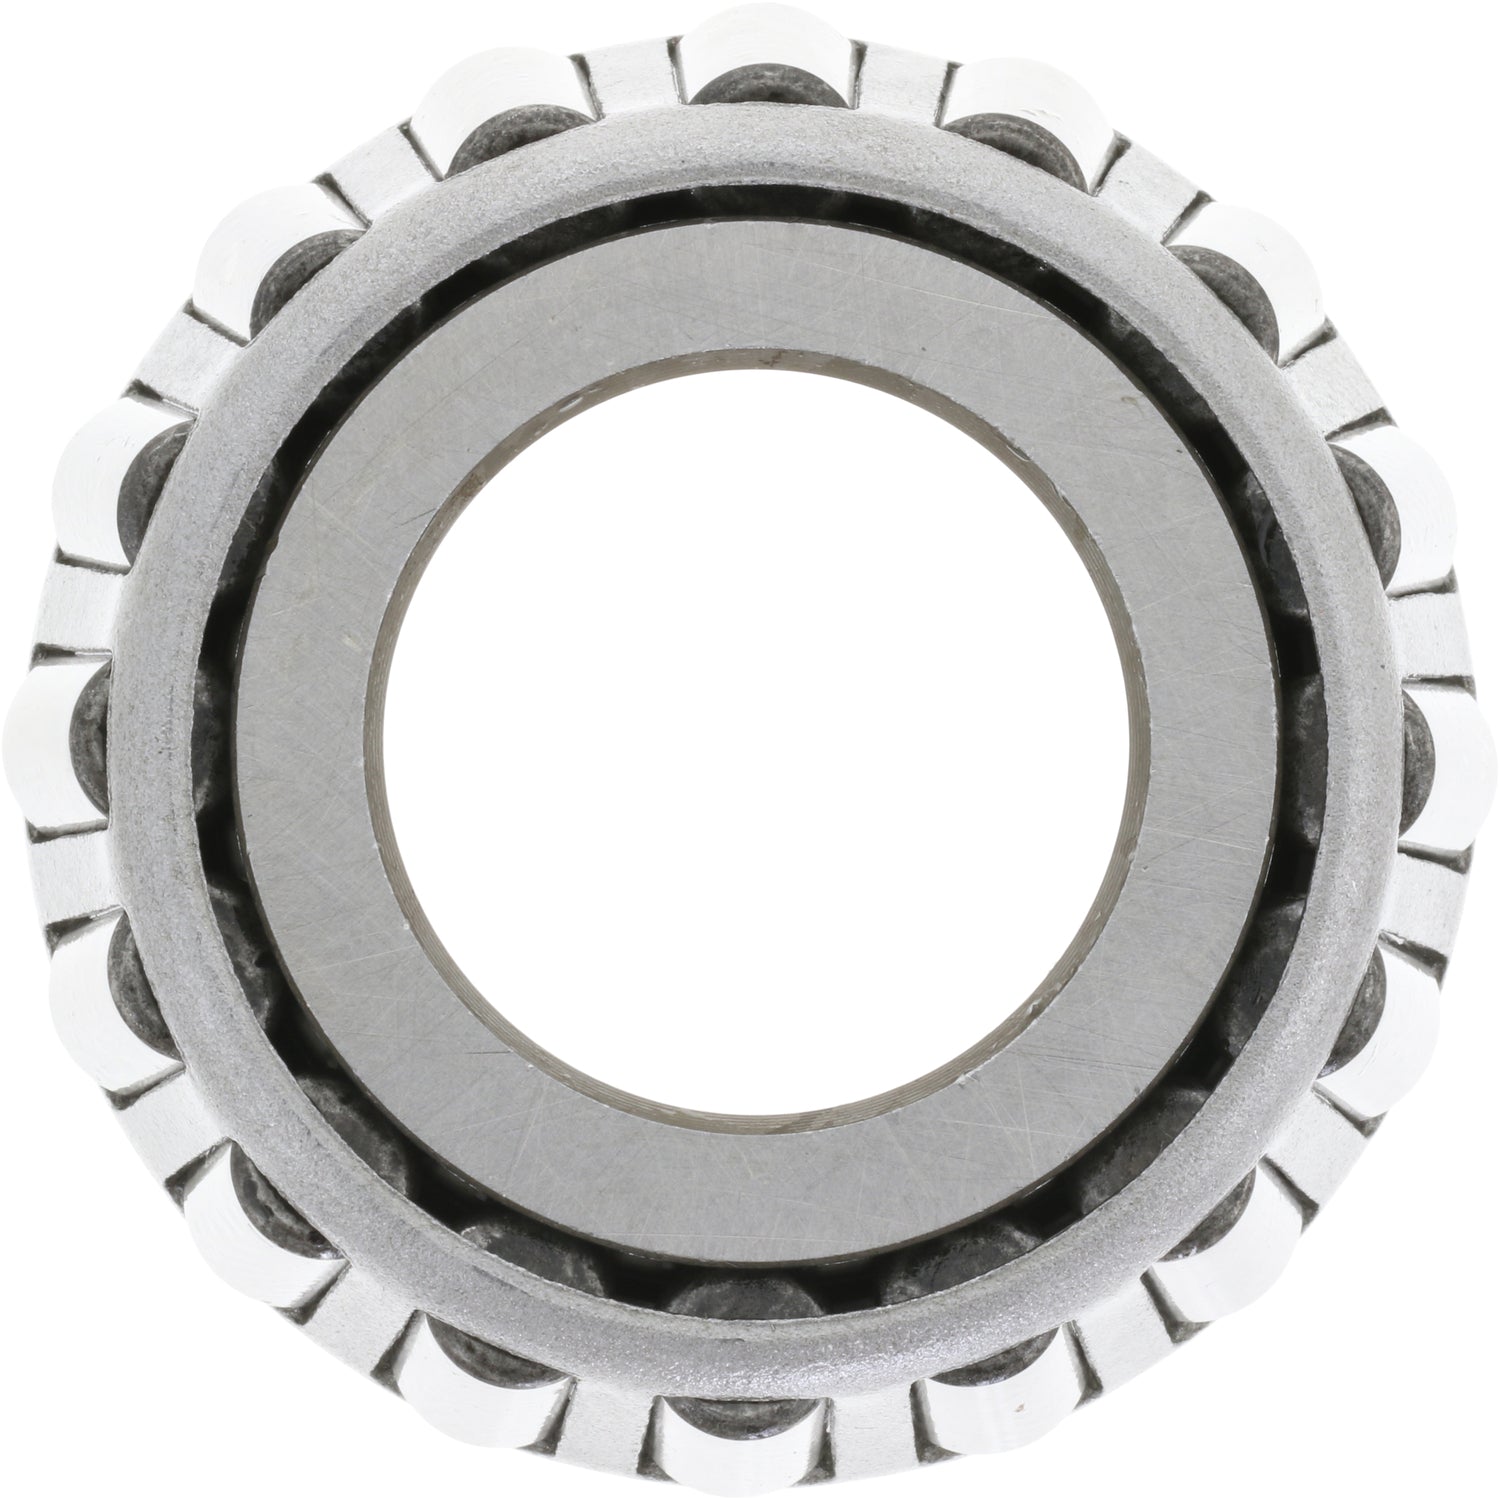 Steel tapered bearing on white background.